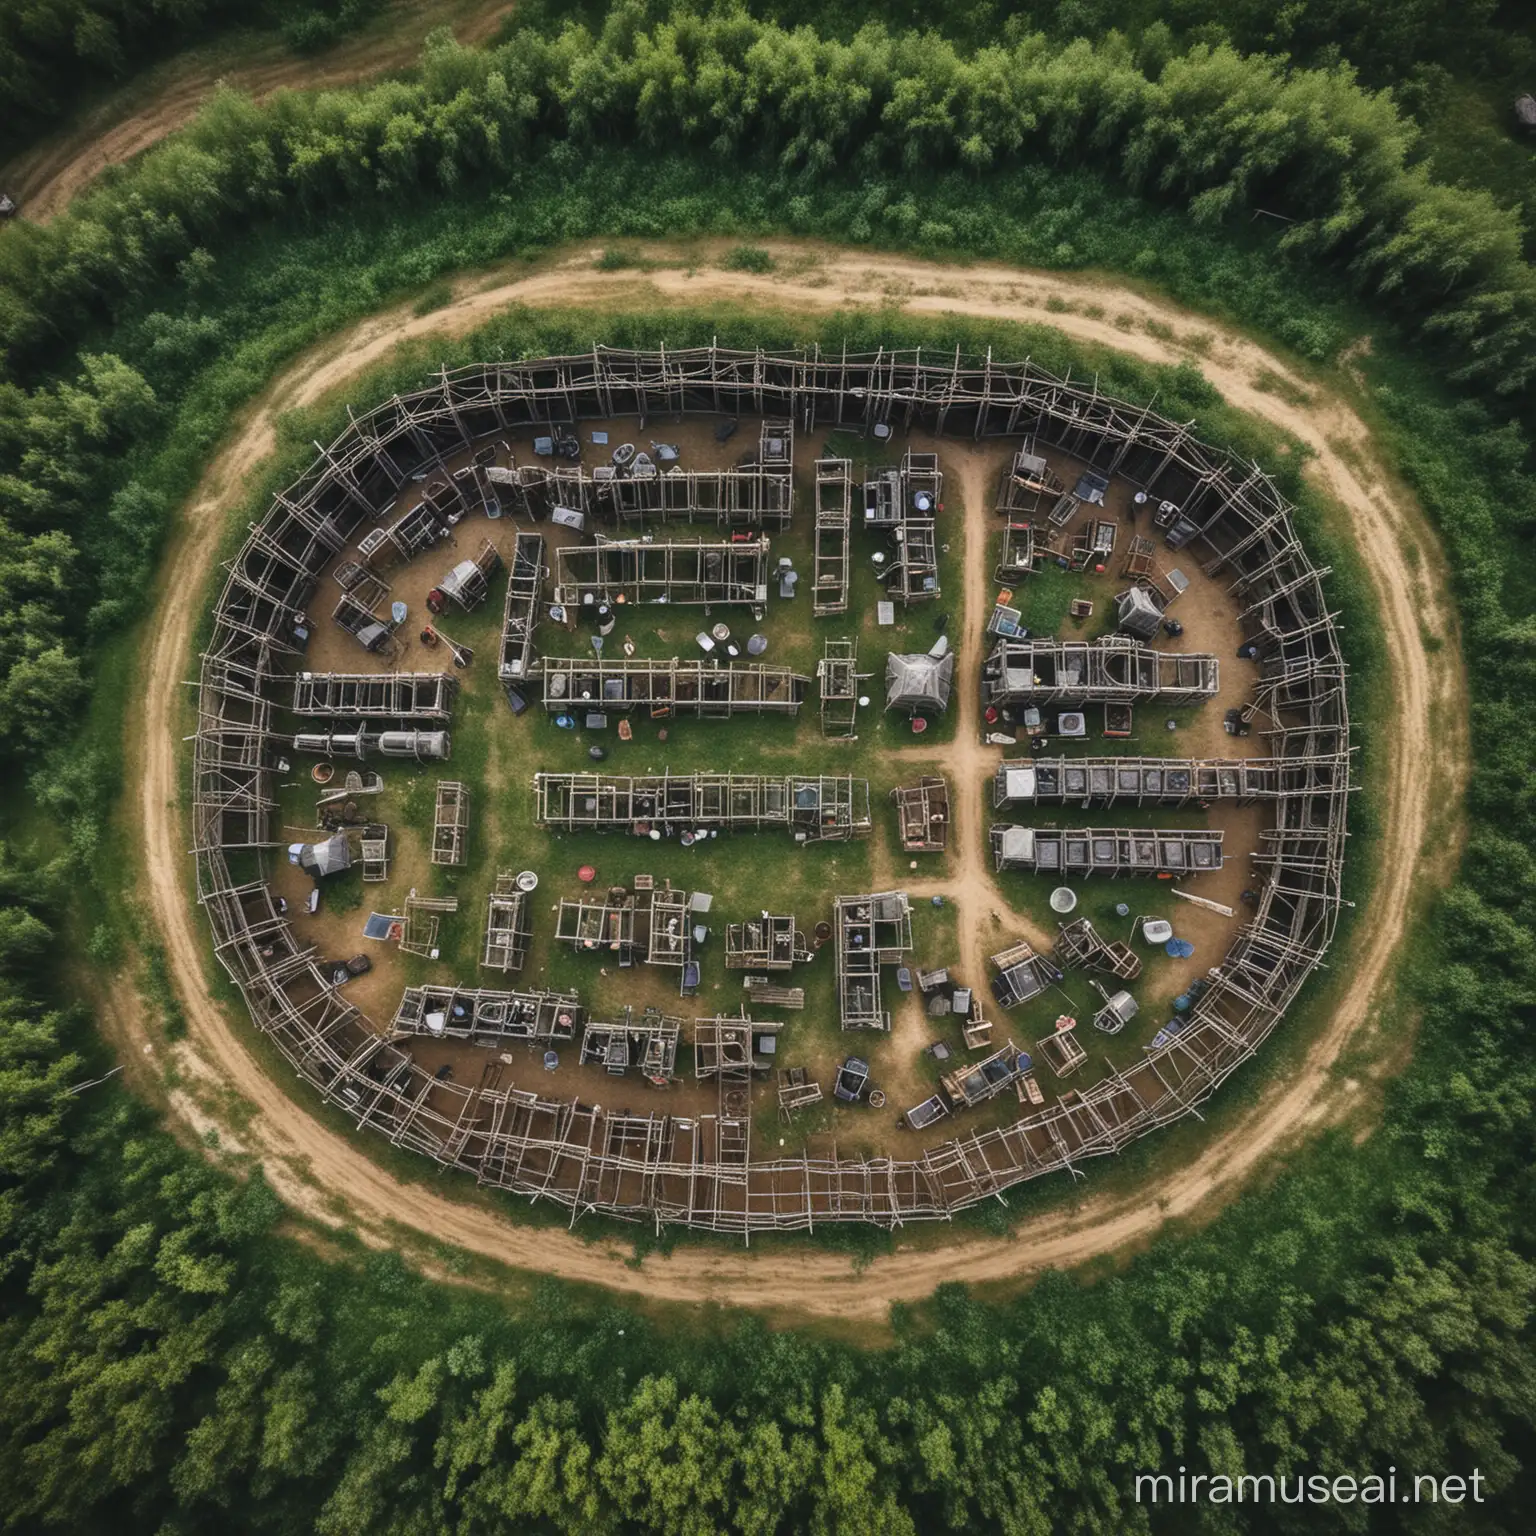 Medieval Villains Camp Aerial View of Captive Cages in the Meadow